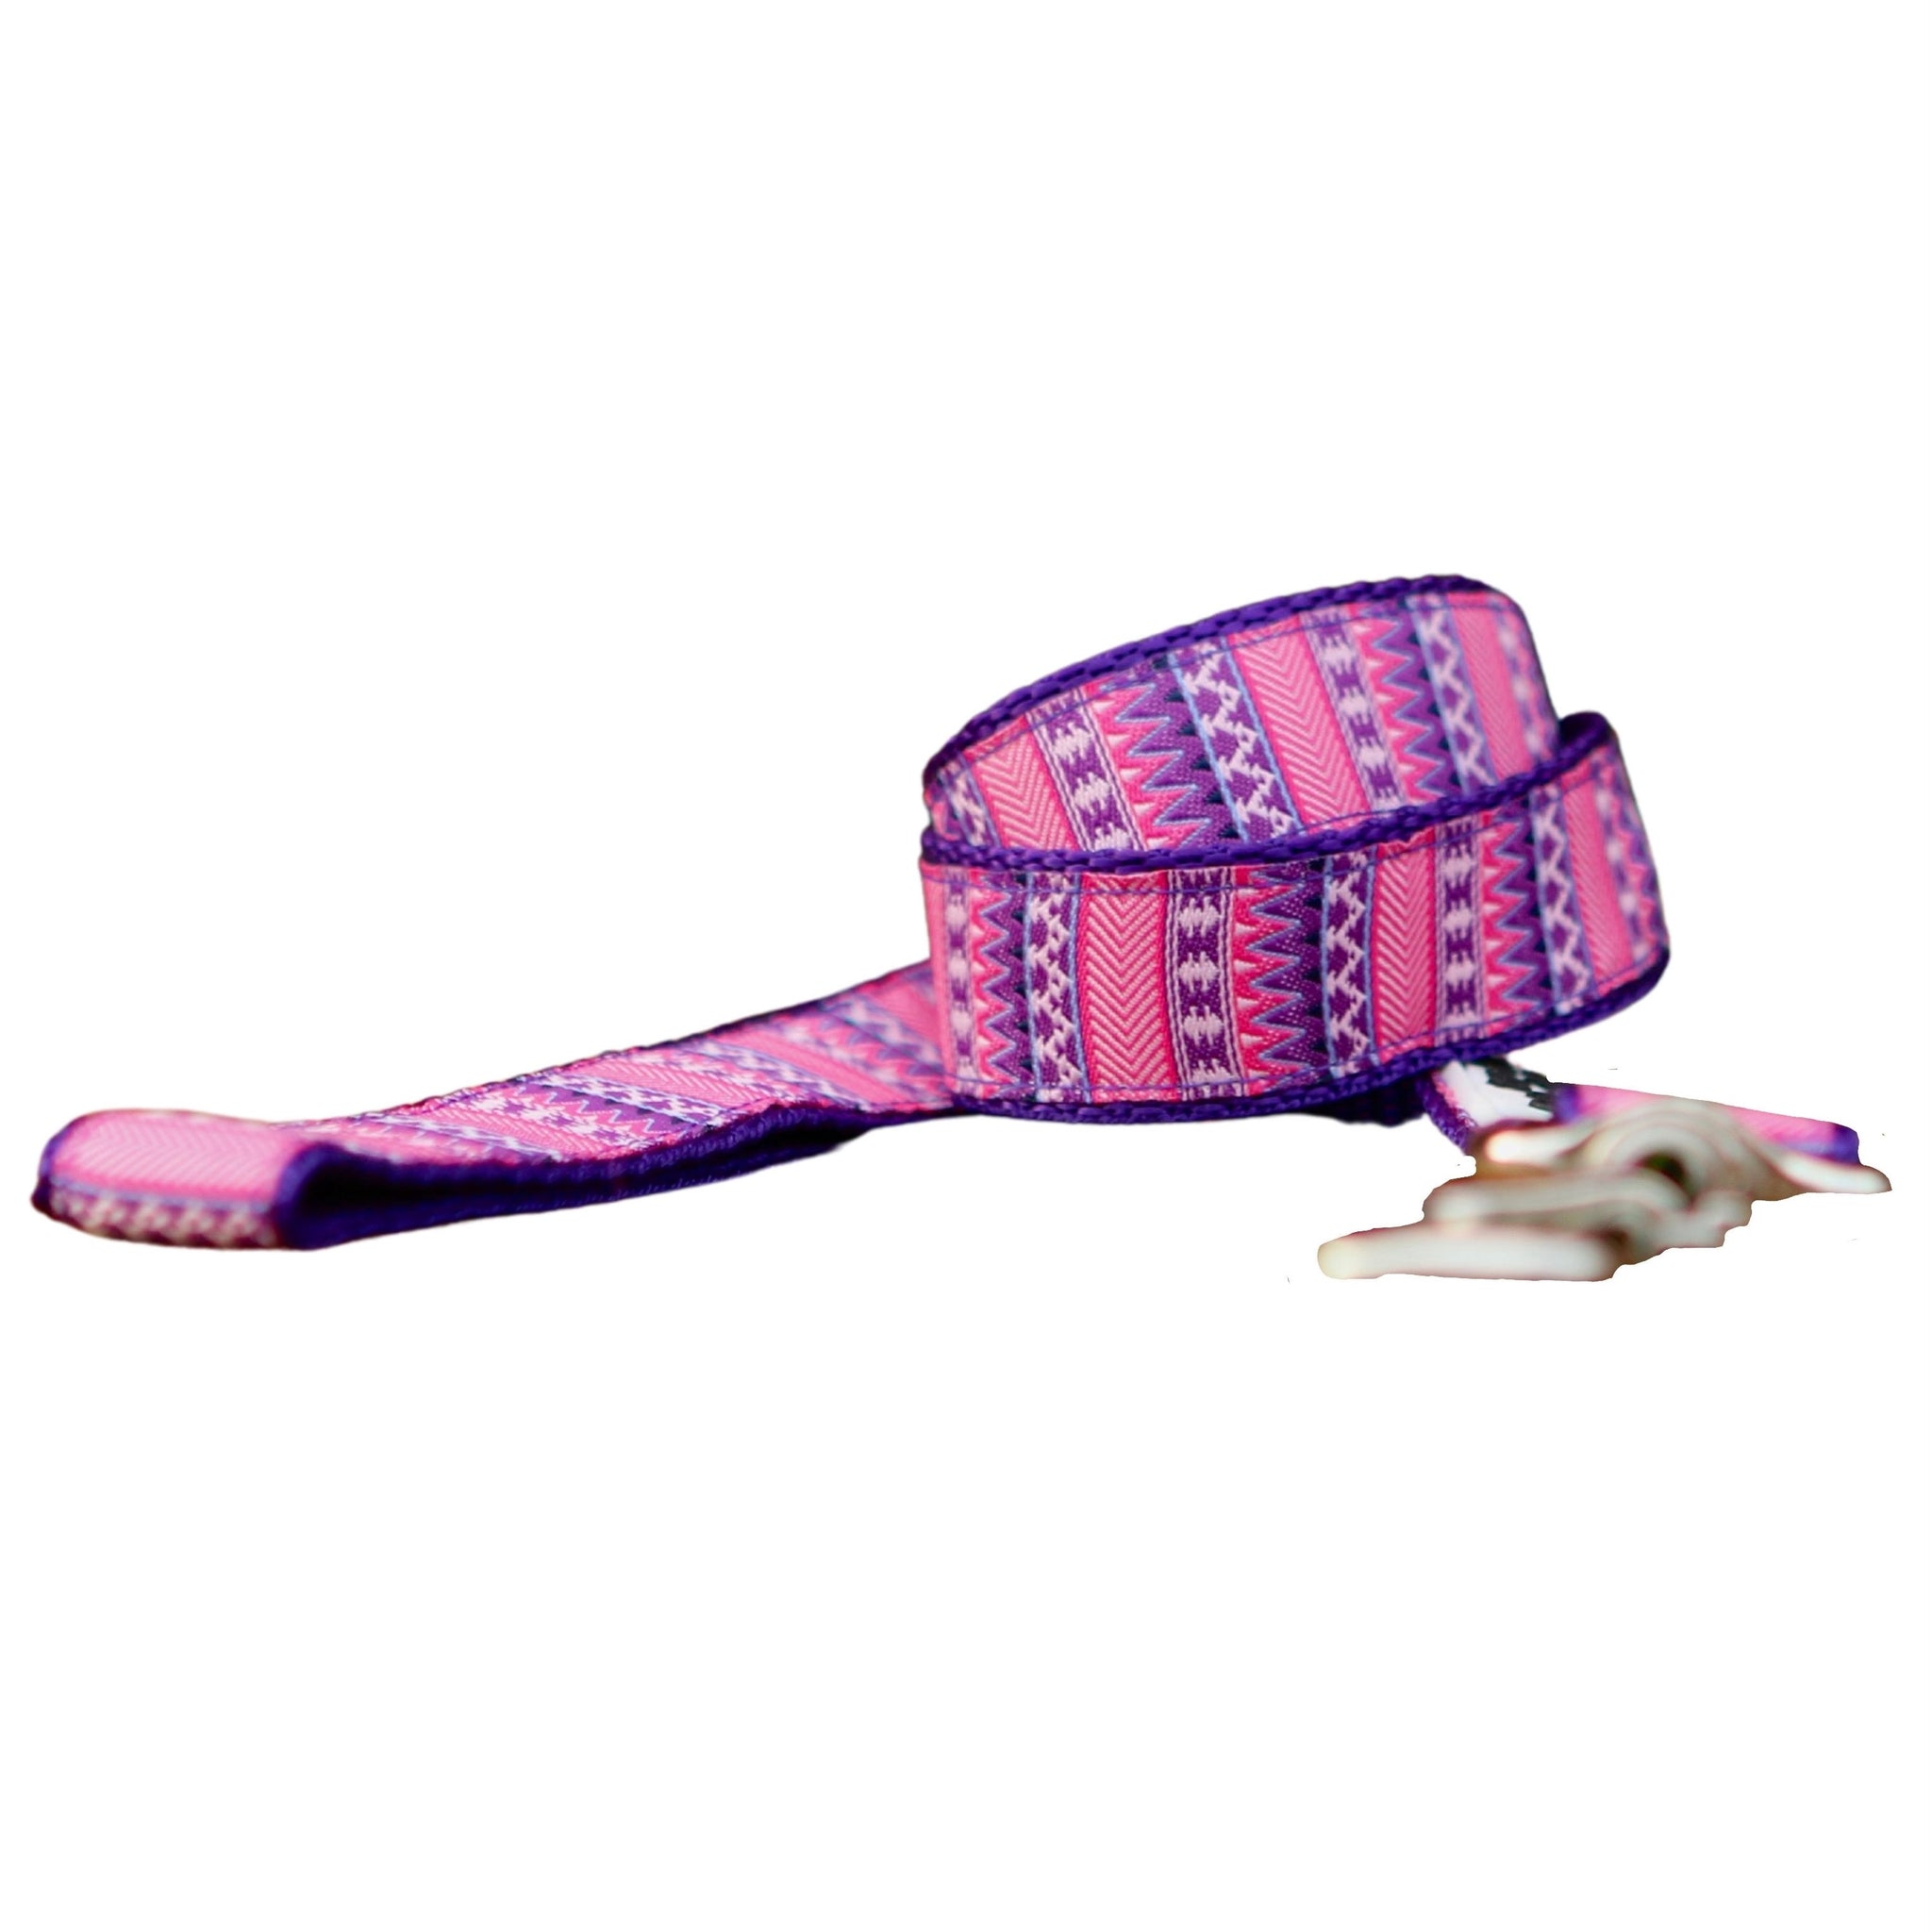 Dog leash featuring a vibrant pink and purple Aztec themed ribbon on purple webbing.